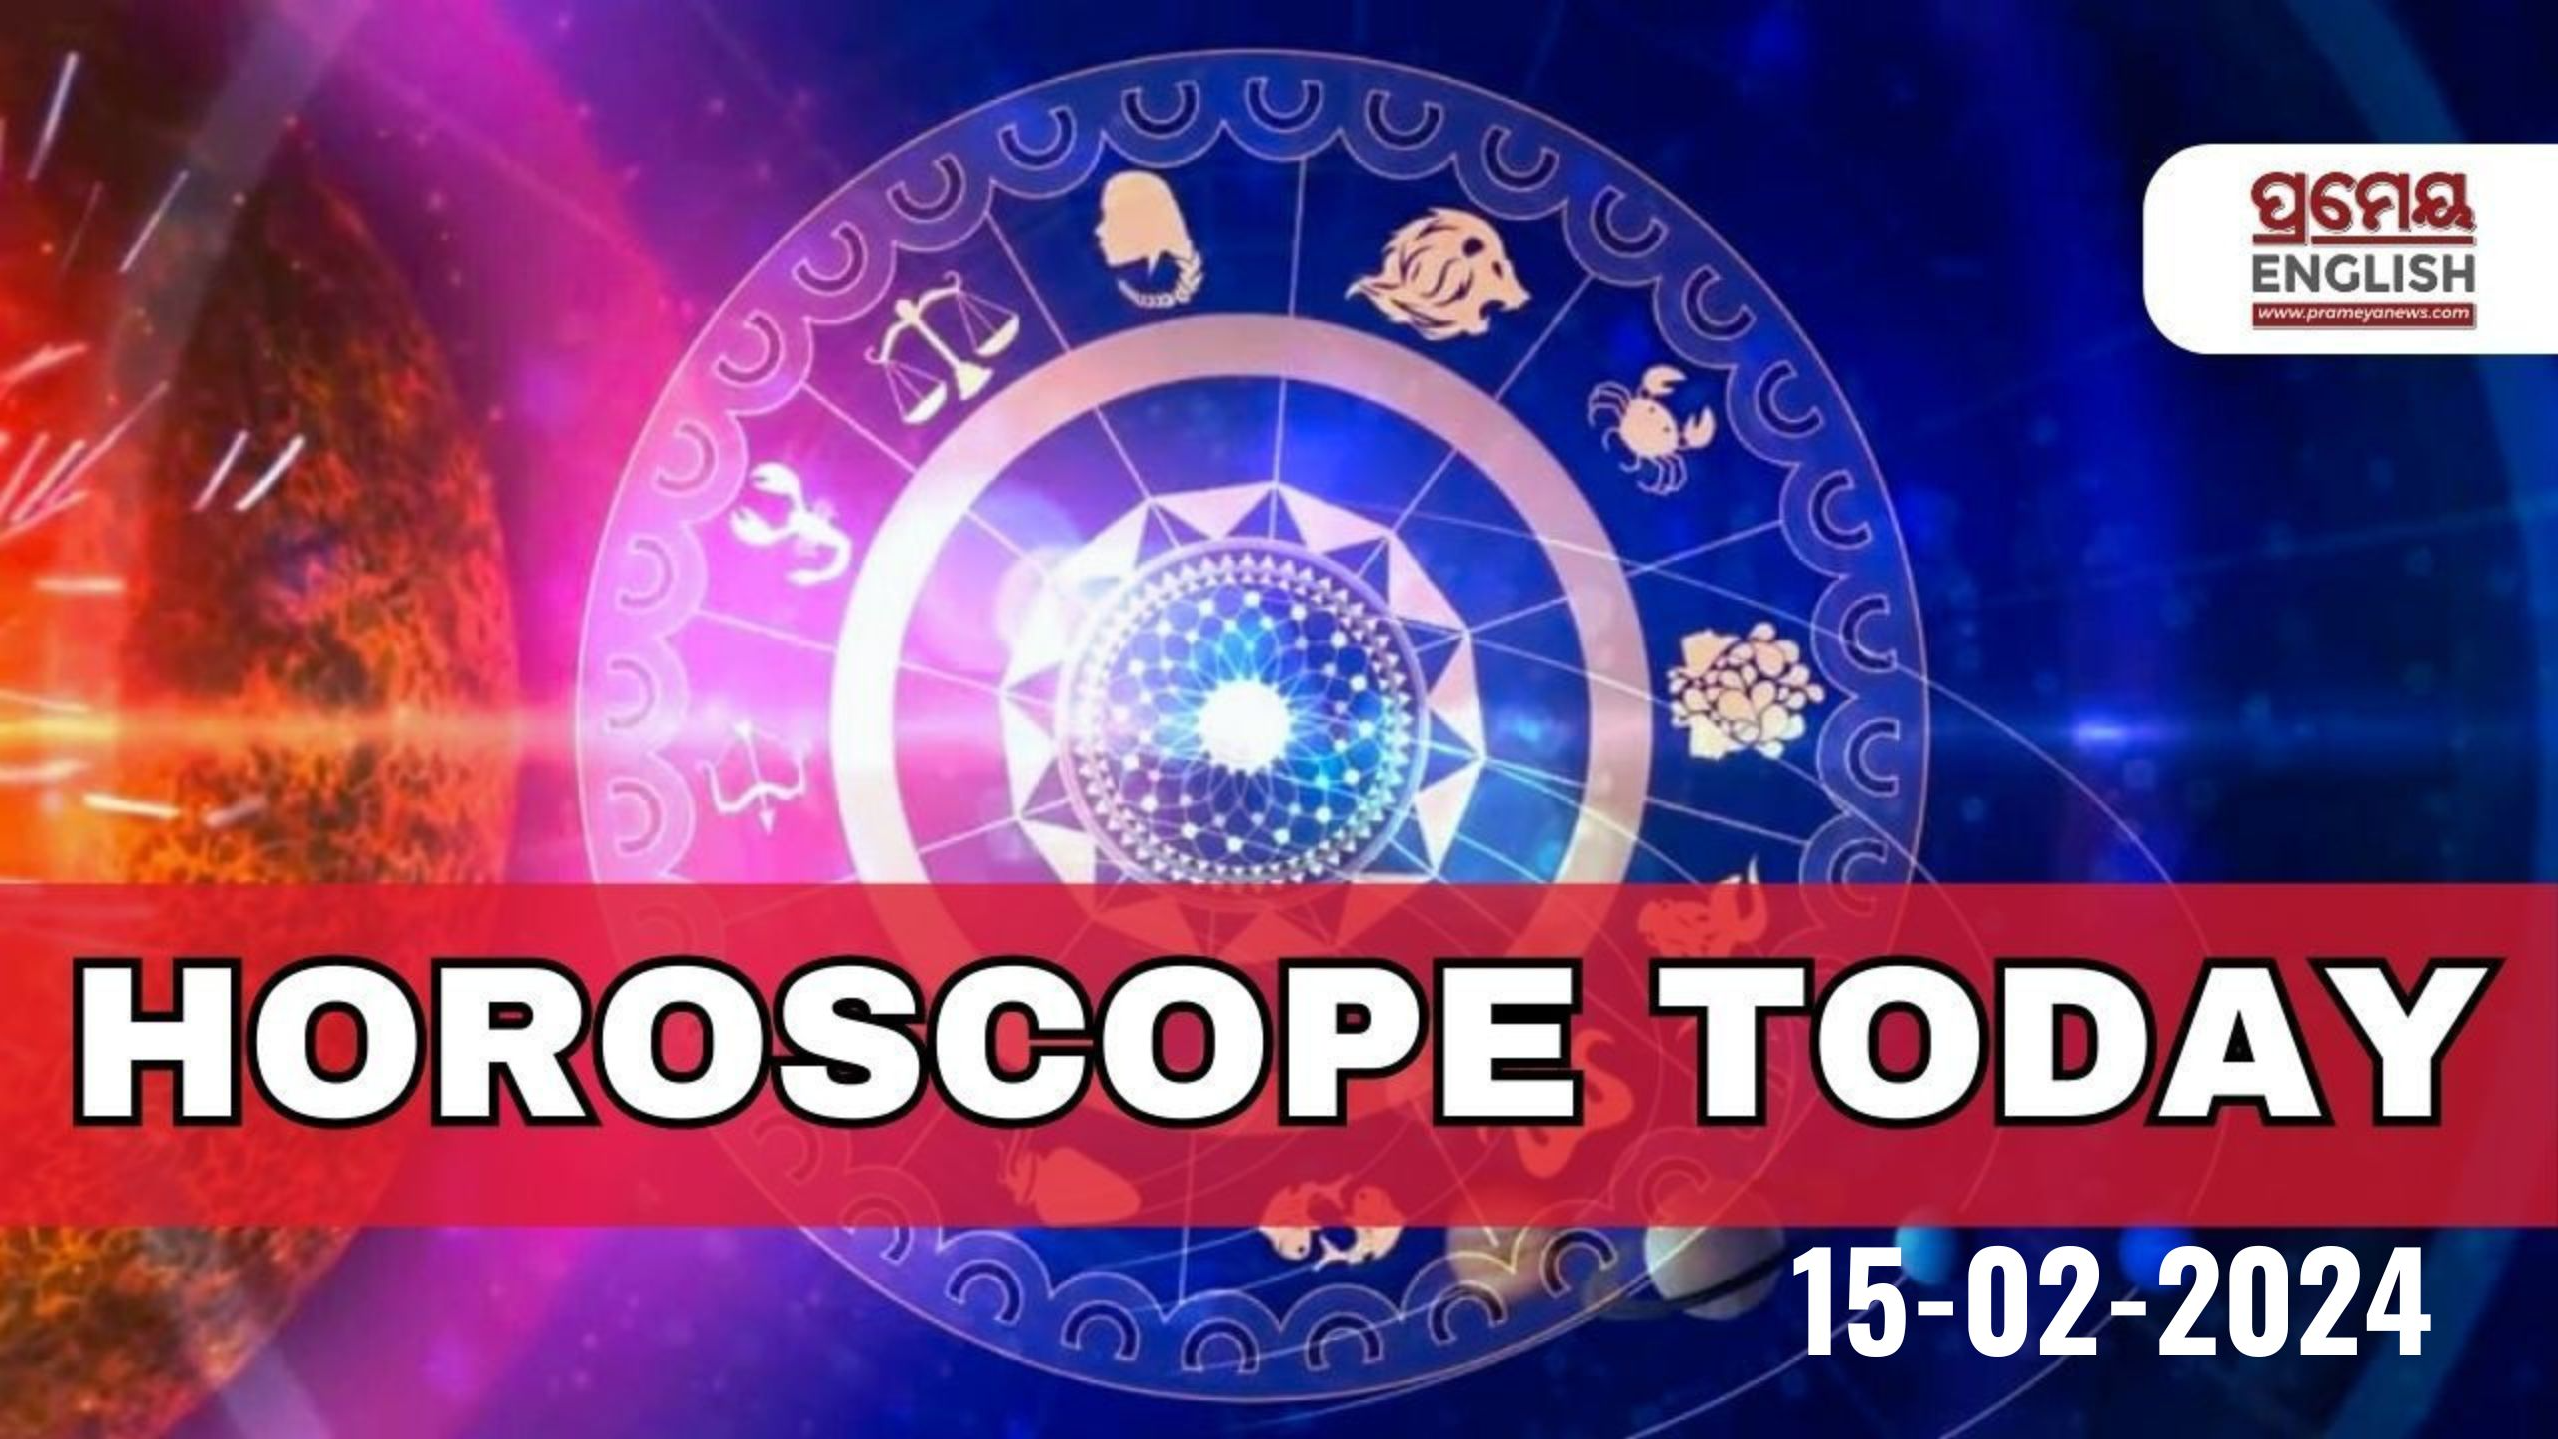 Horoscope Today: Astrological prediction for January 30, 2024